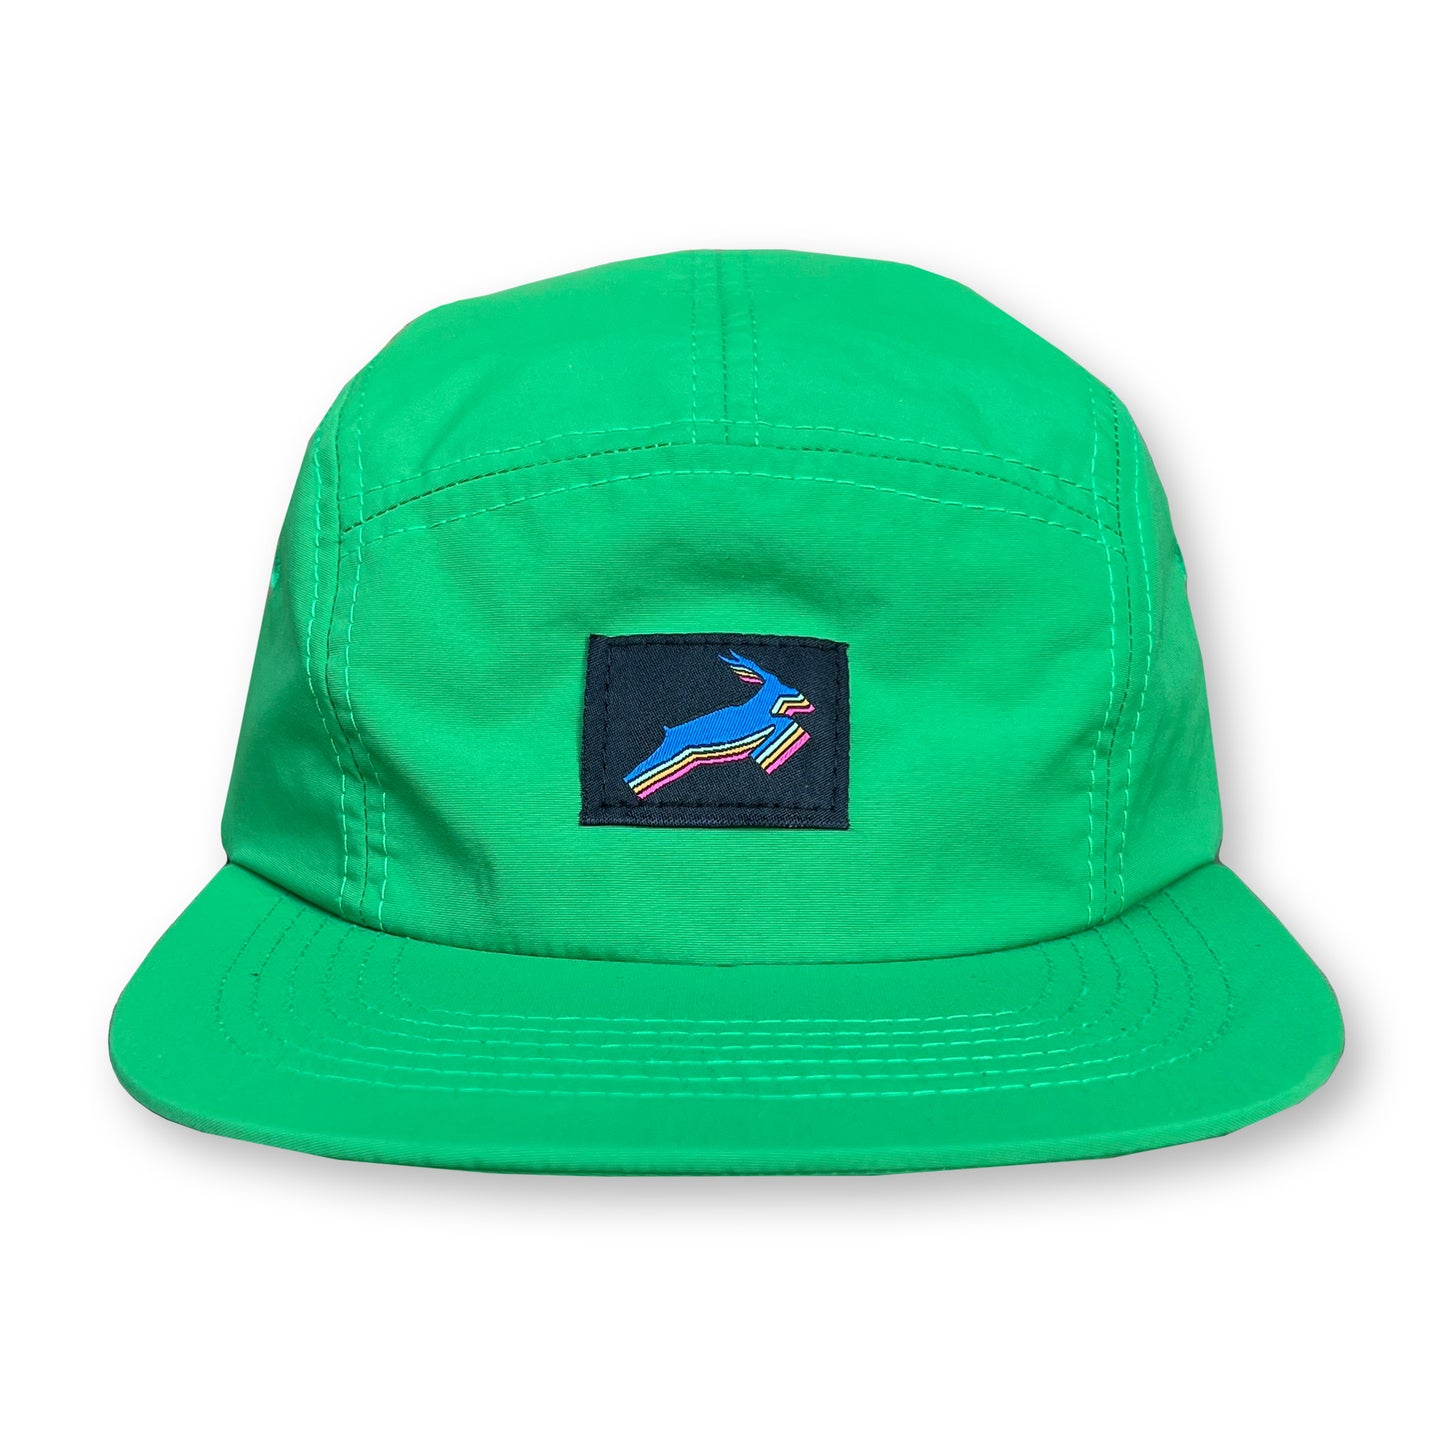 Antelope Five Panel Hat / Sour Apple Nylon with Lite Brite Antelope Patch